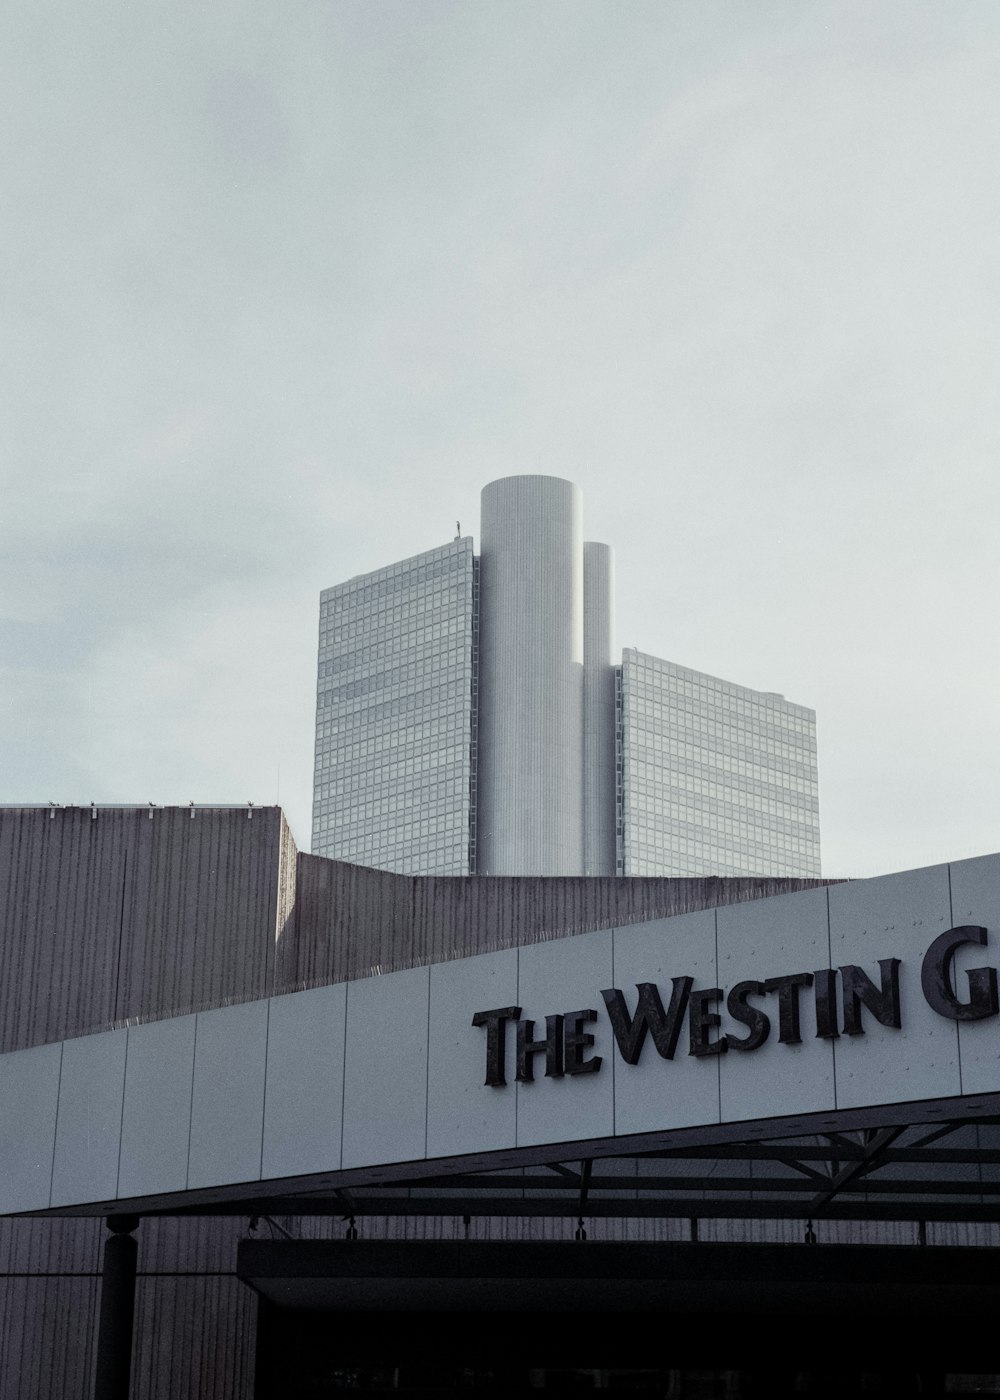 a large building with a sign that says the westin group